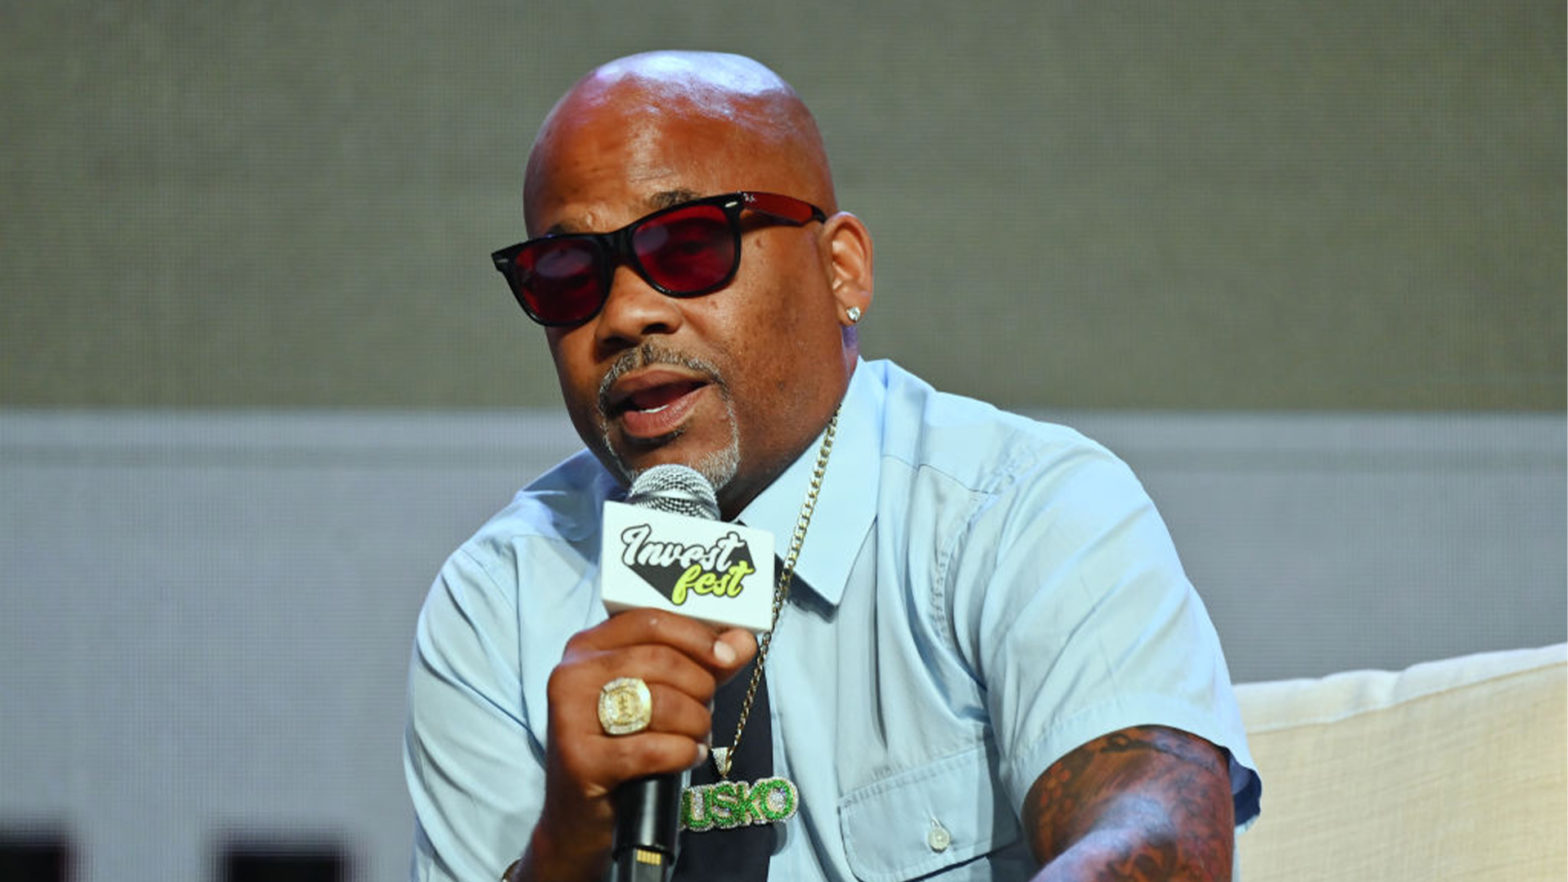 Dame Dash On His Daughter's Education: 'I Would Have Way Preferred To Just Give Her A Quarter Million Dollars'